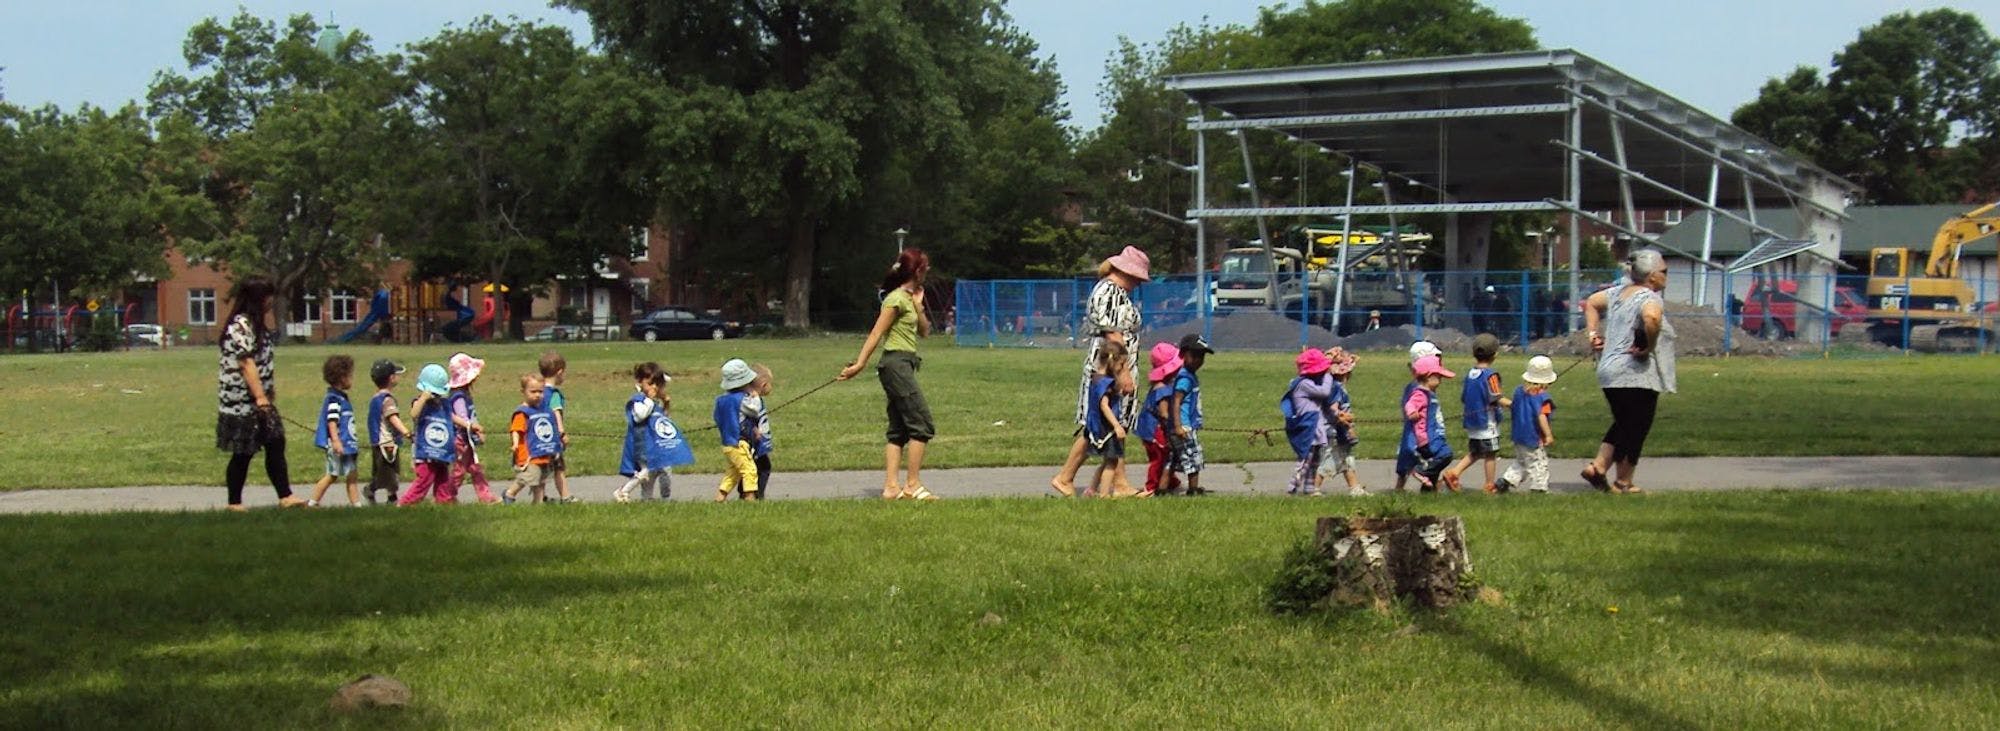 Children from a local daycare walking at Jean-Brillant park in Montreal, Quebec.